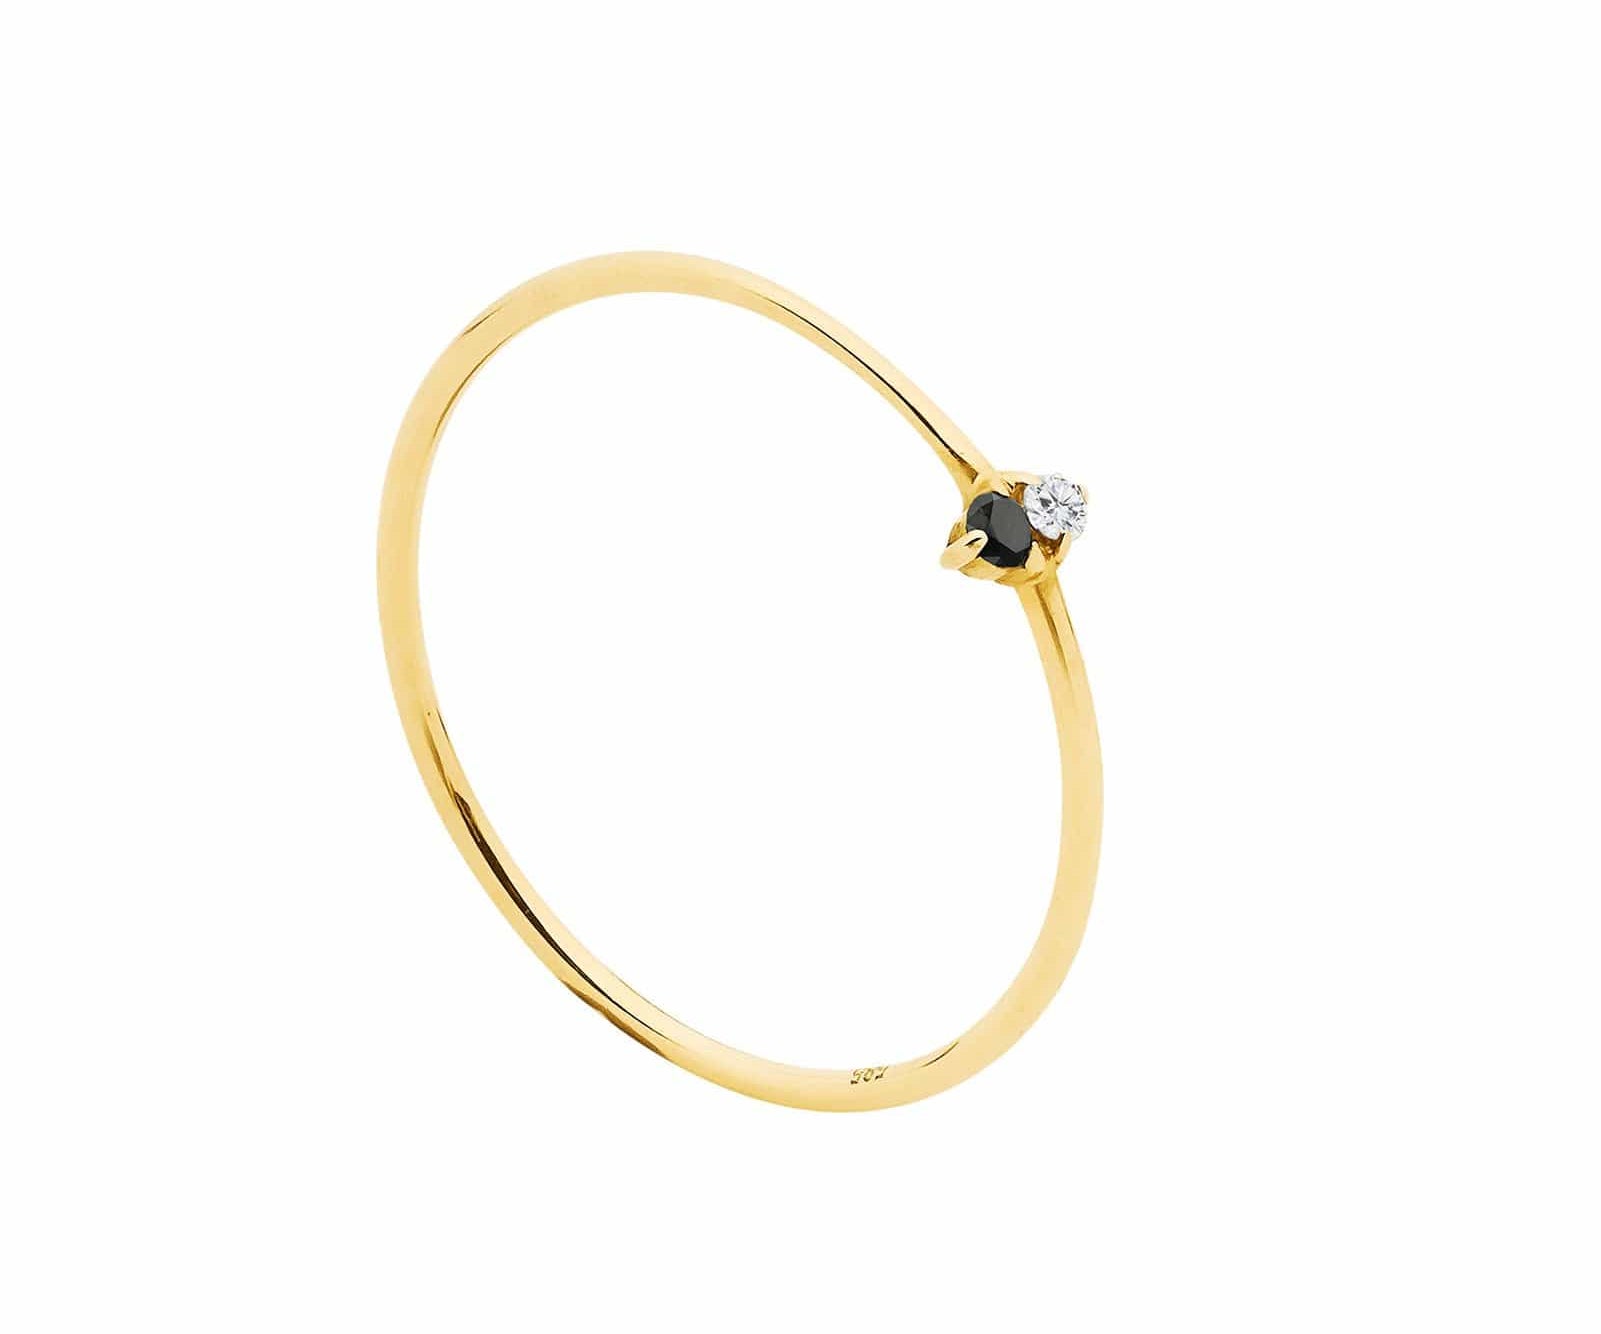 Picture of  Luna Rae solid 9k gold Solar Ring